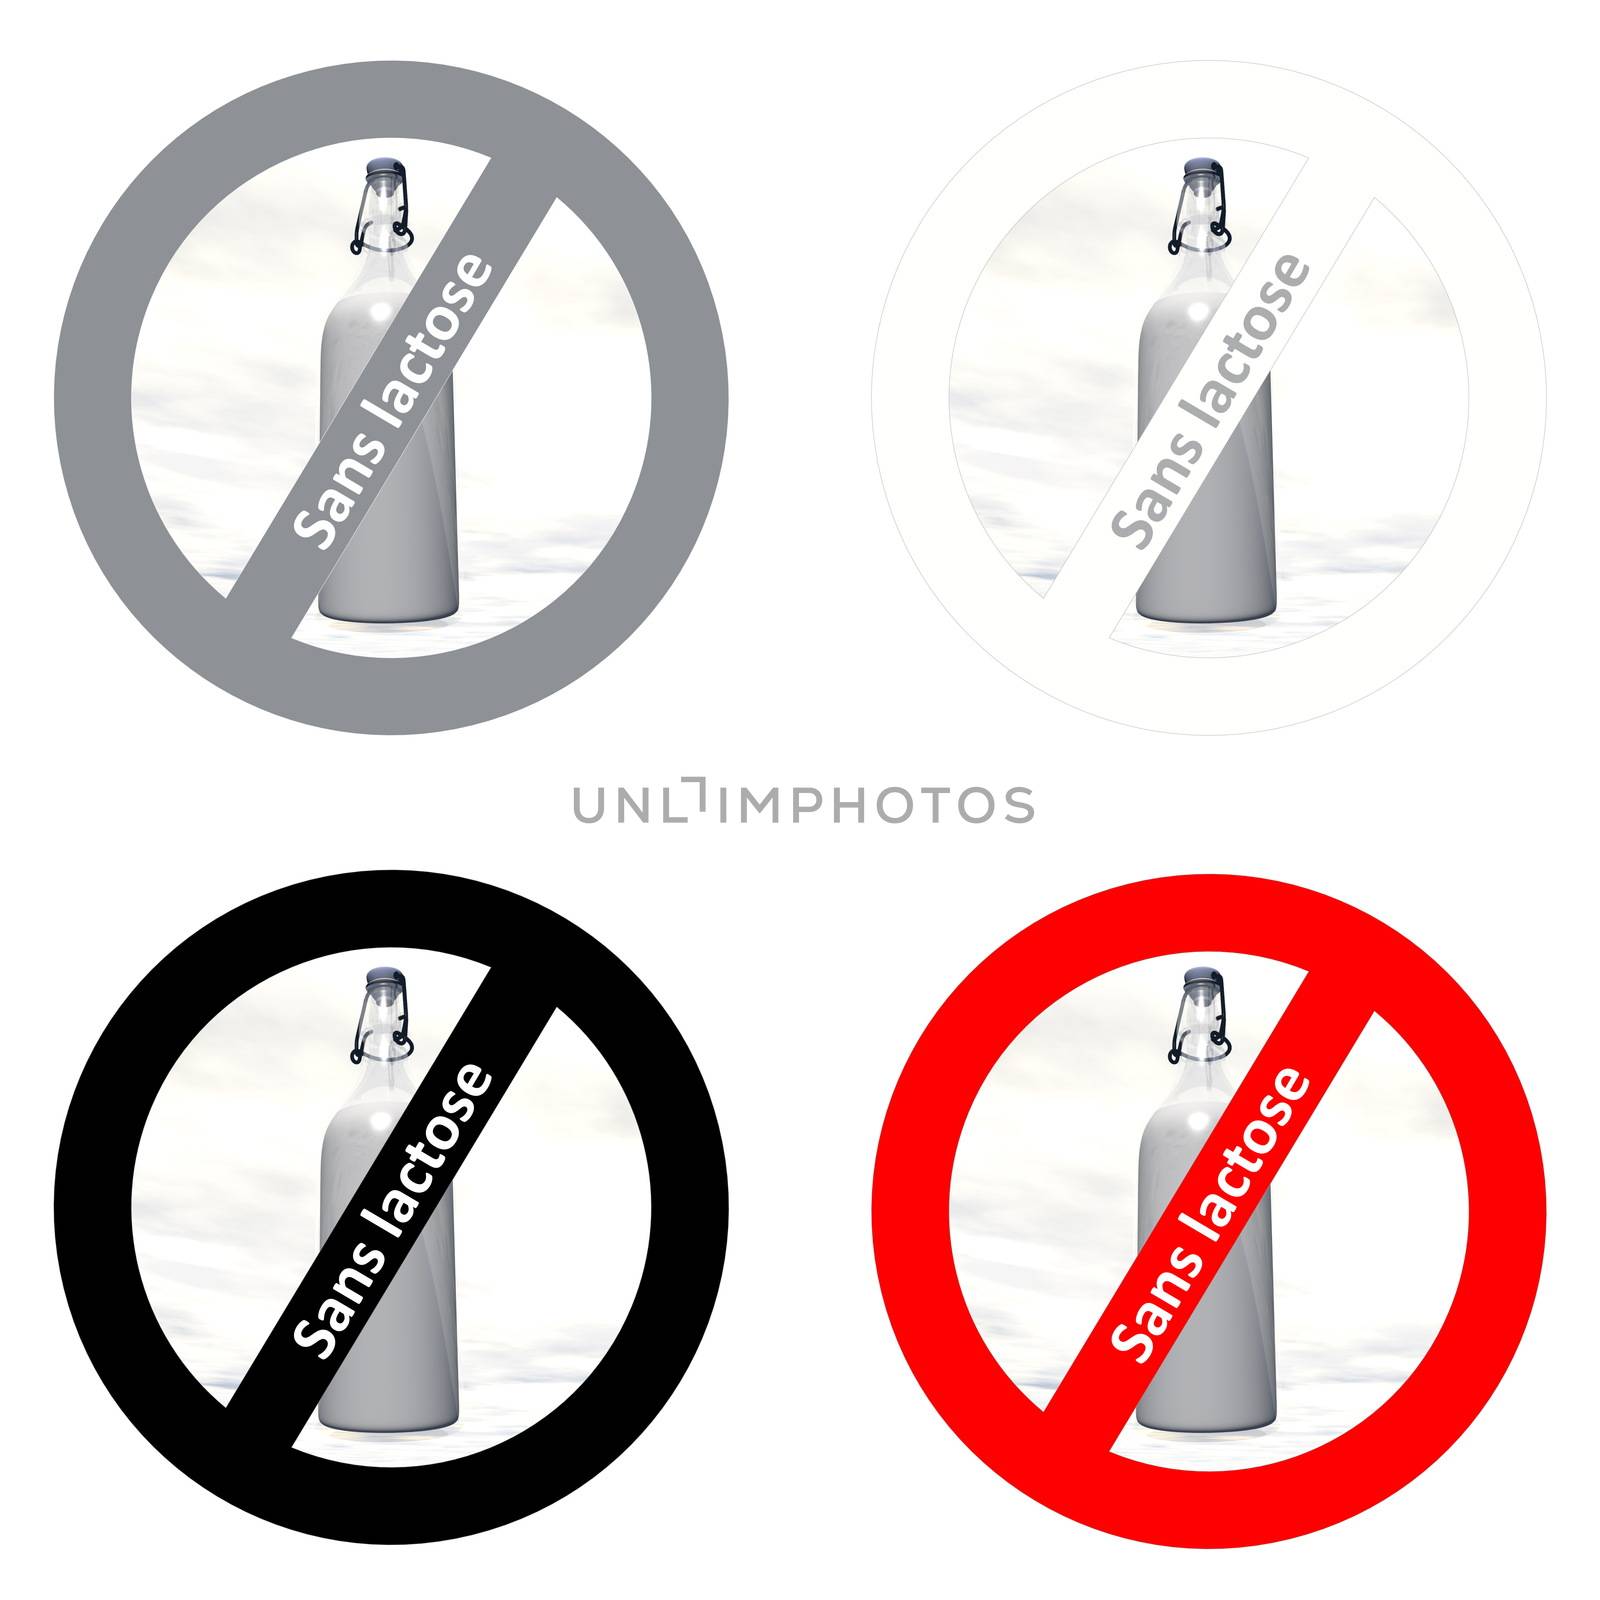 French stickers for dairy free products by Elenaphotos21